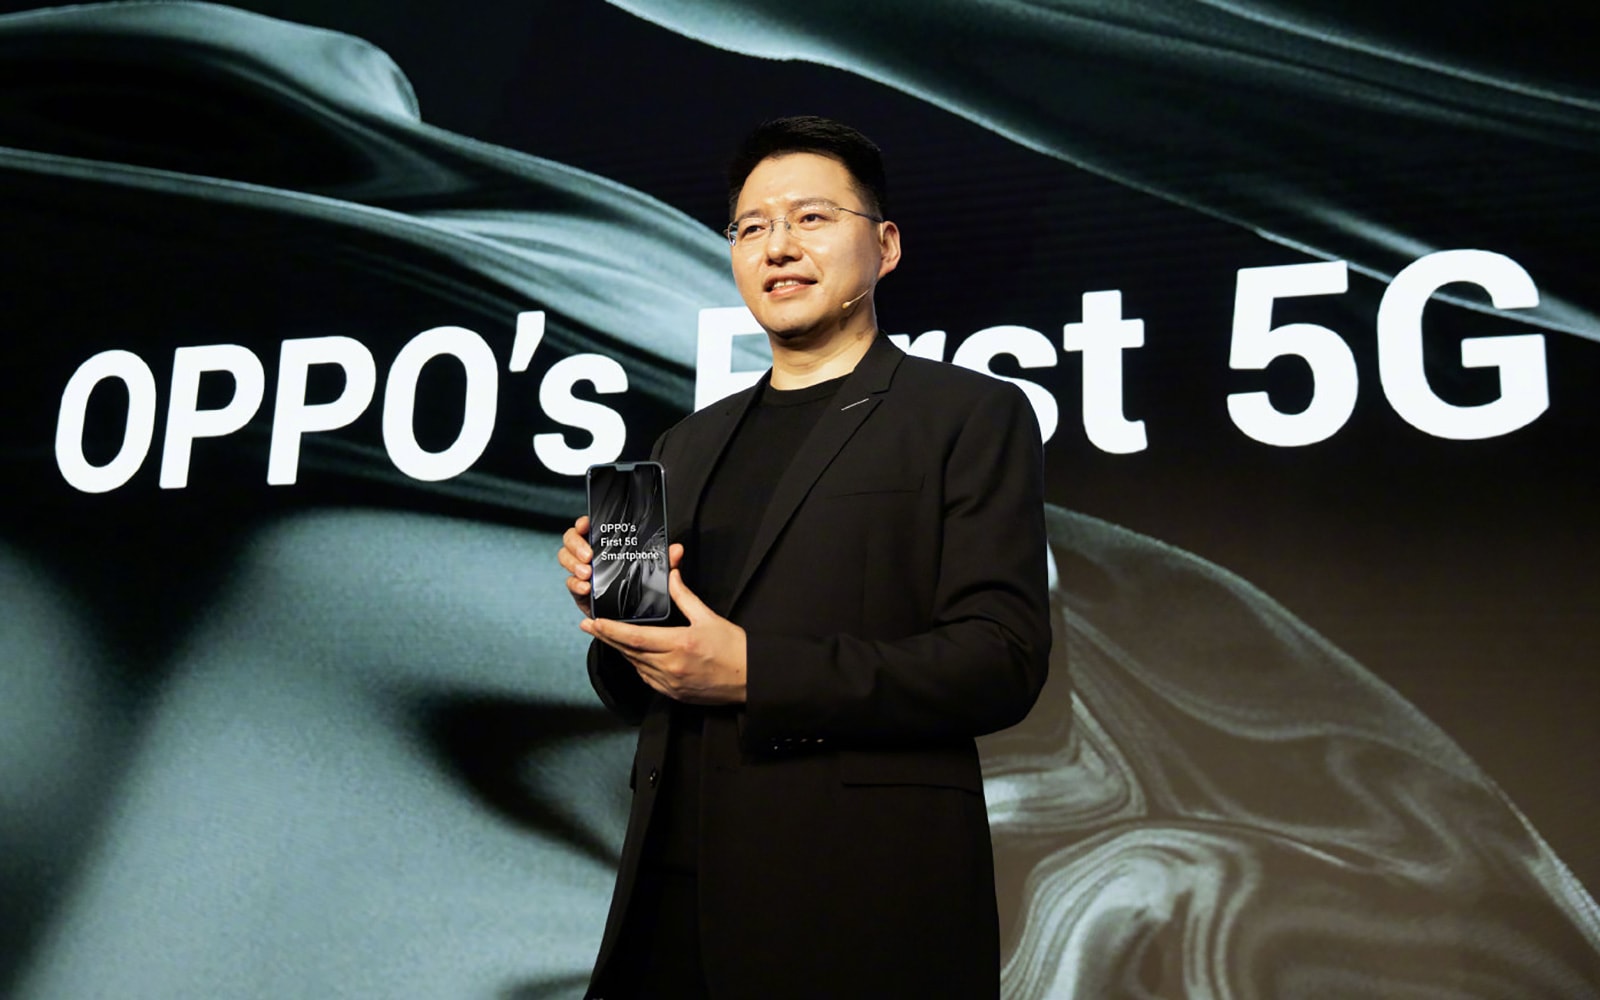 Oppo's first 5G smartphone